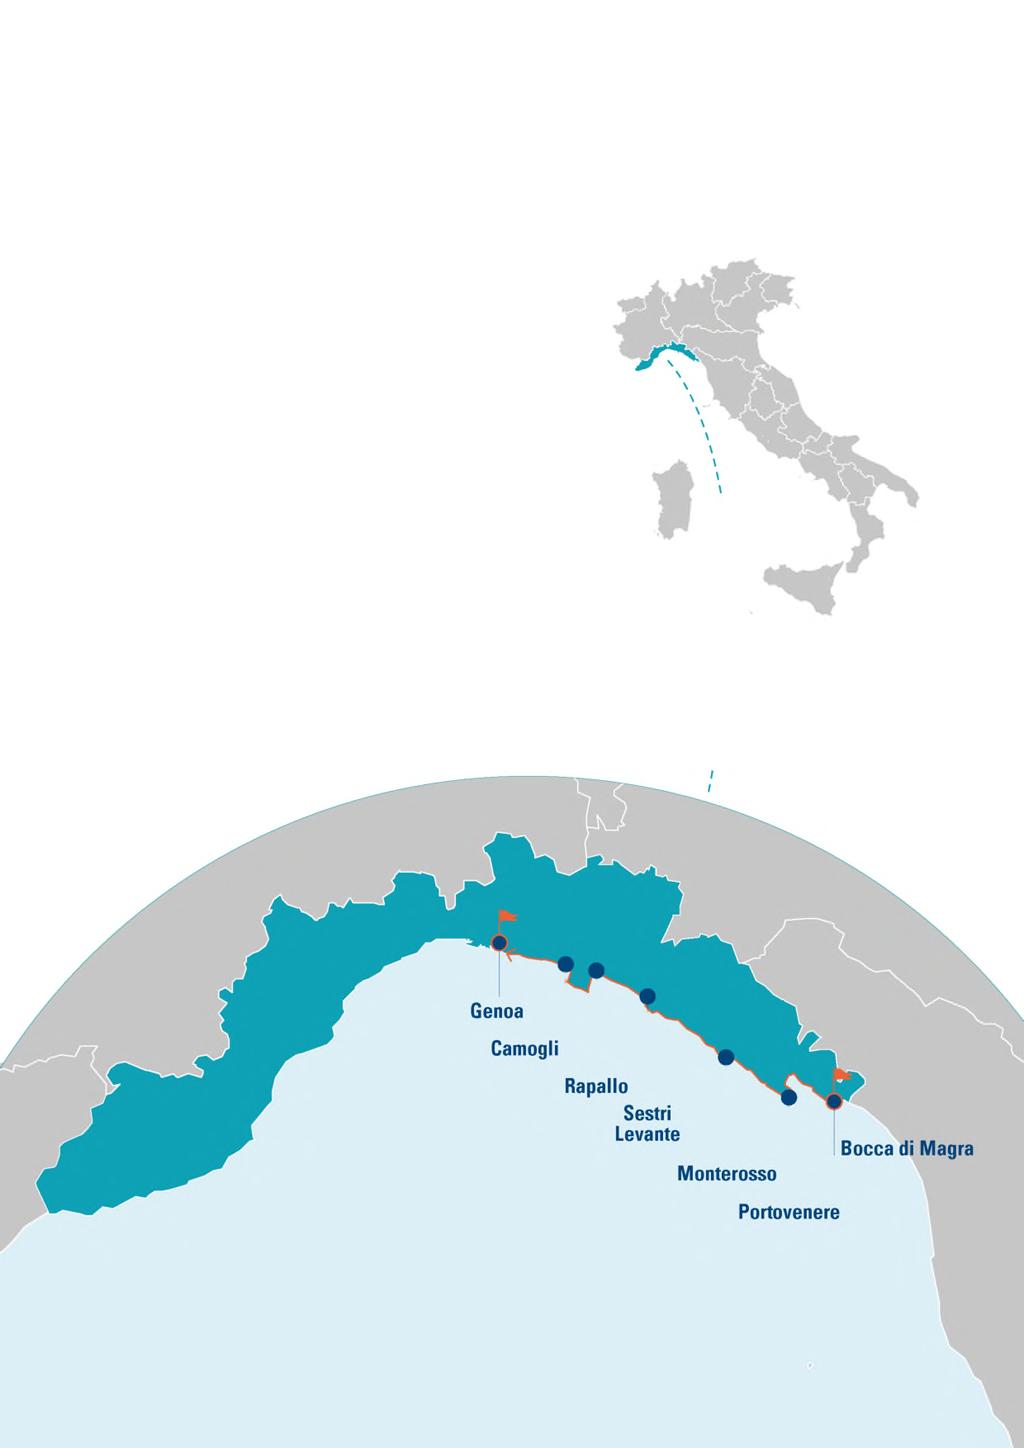 In 2017 the 54th World Rowing Tour w ill take place in Italy along the